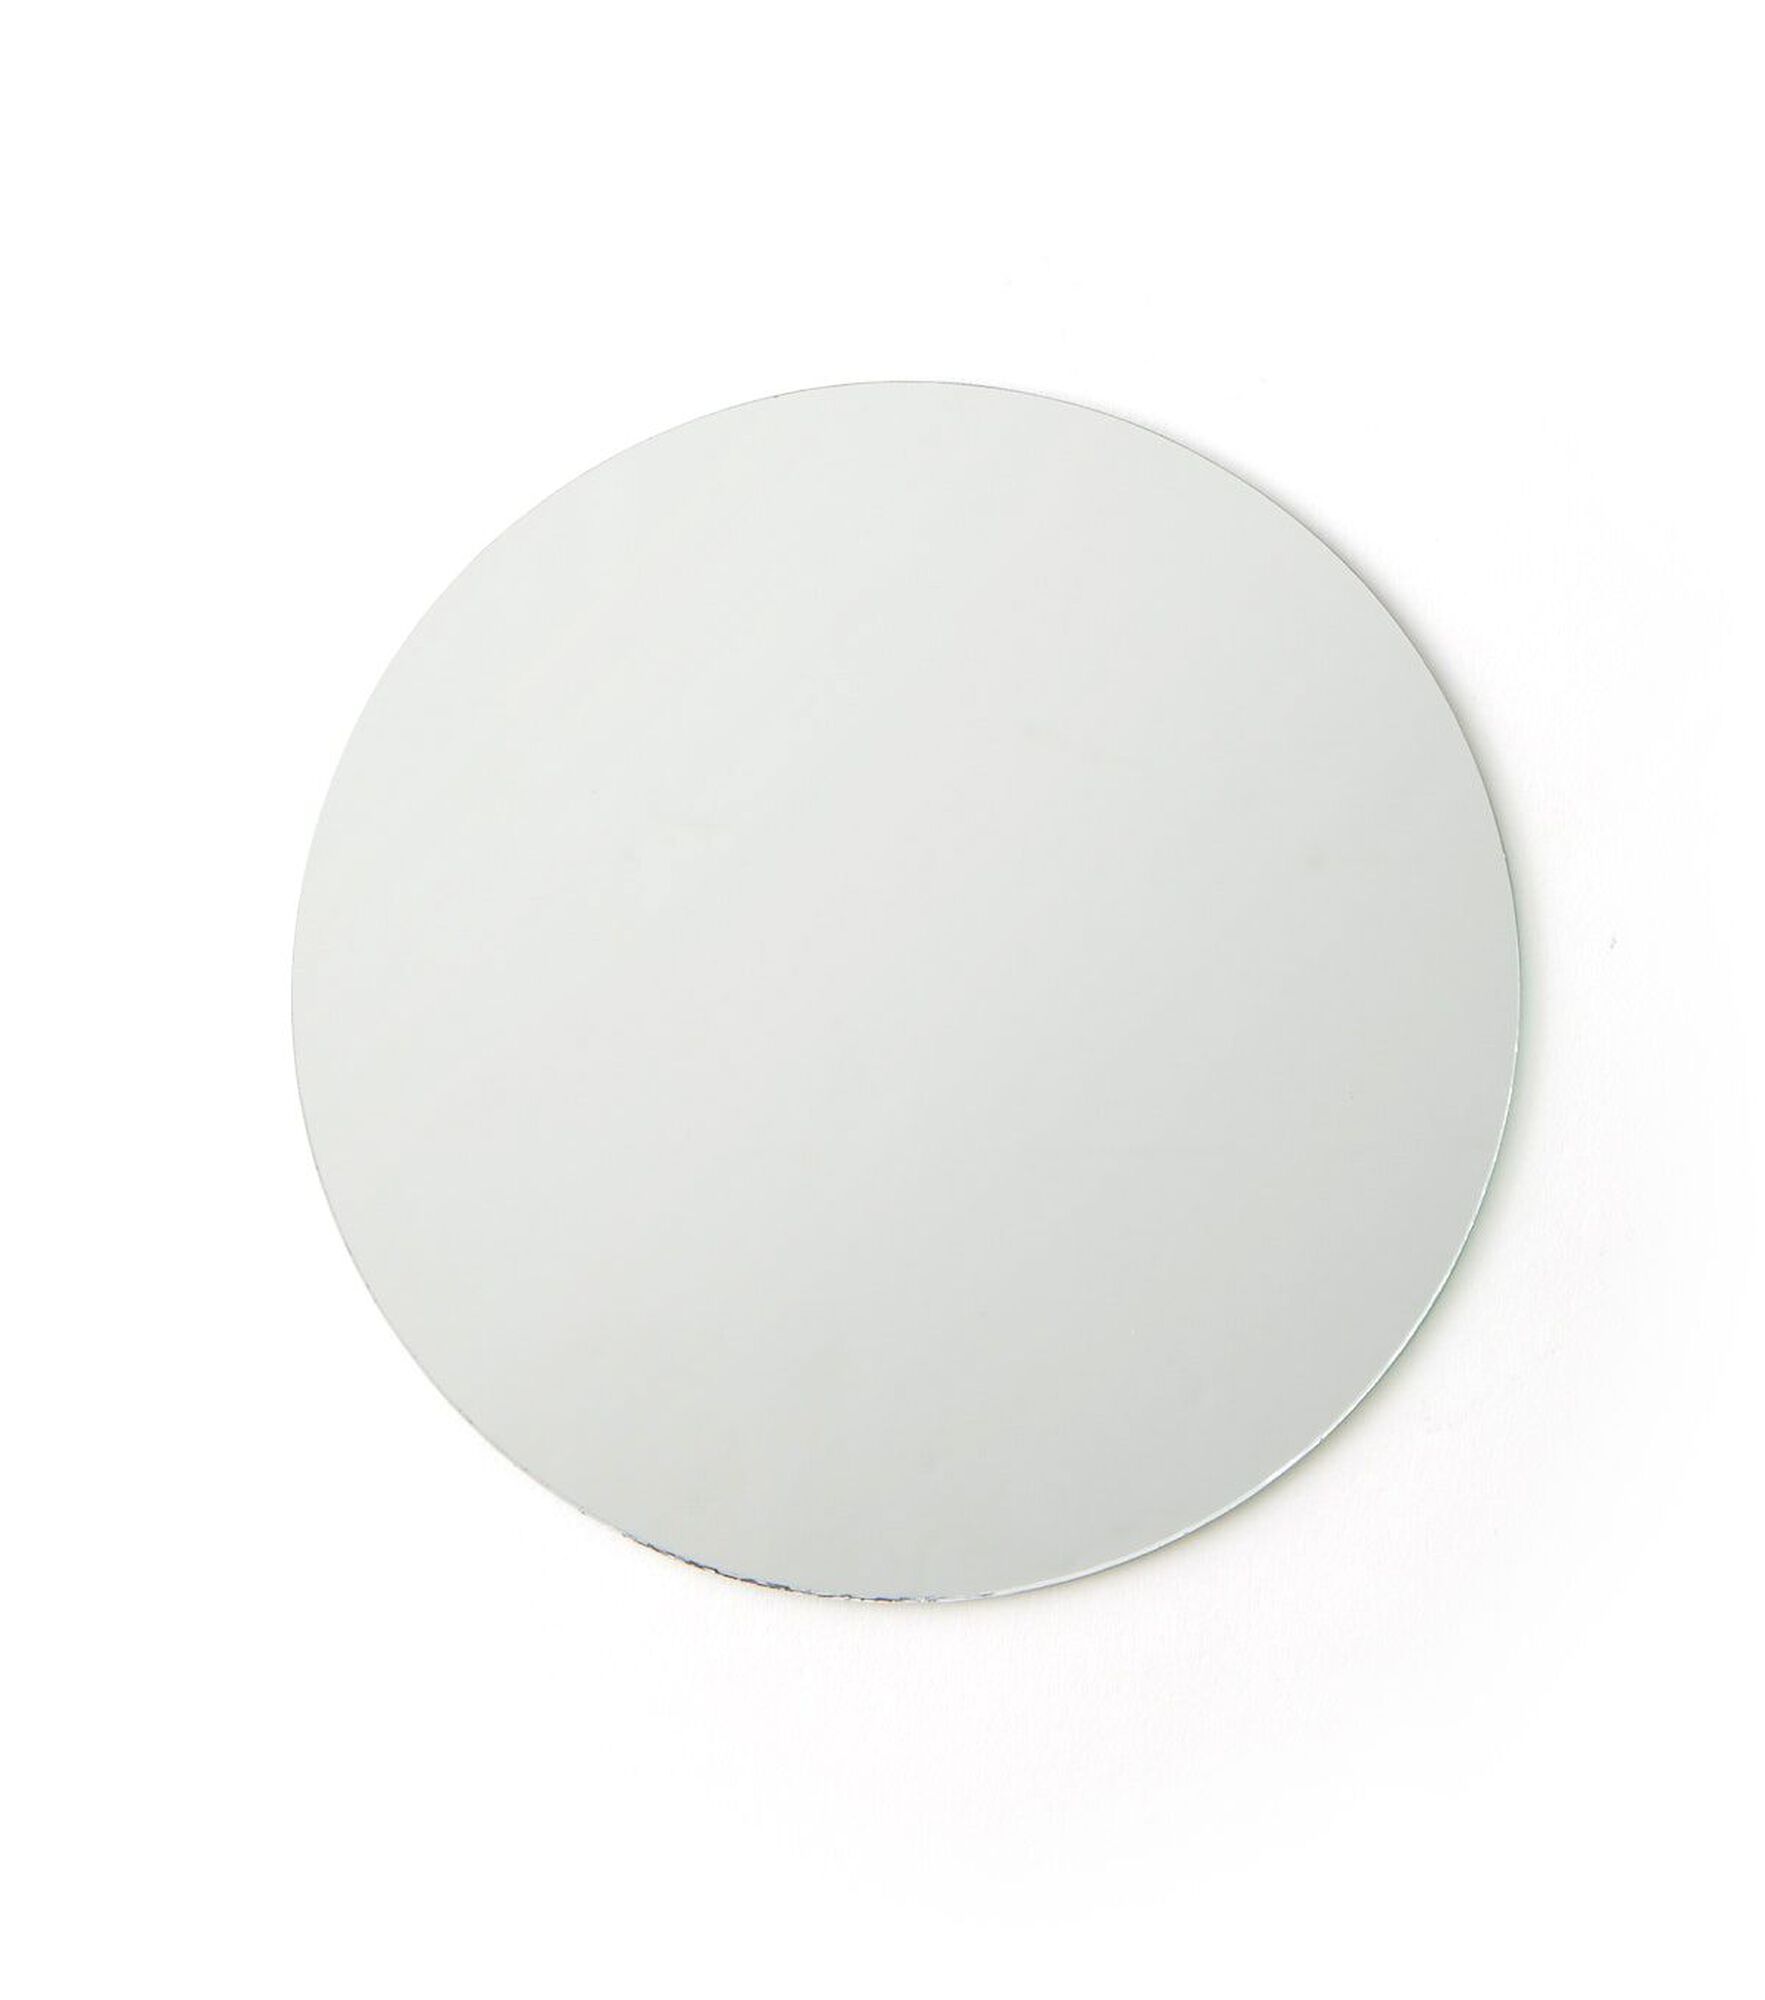 Round Glass Decor Mirrors by Park Lane, 5", hi-res